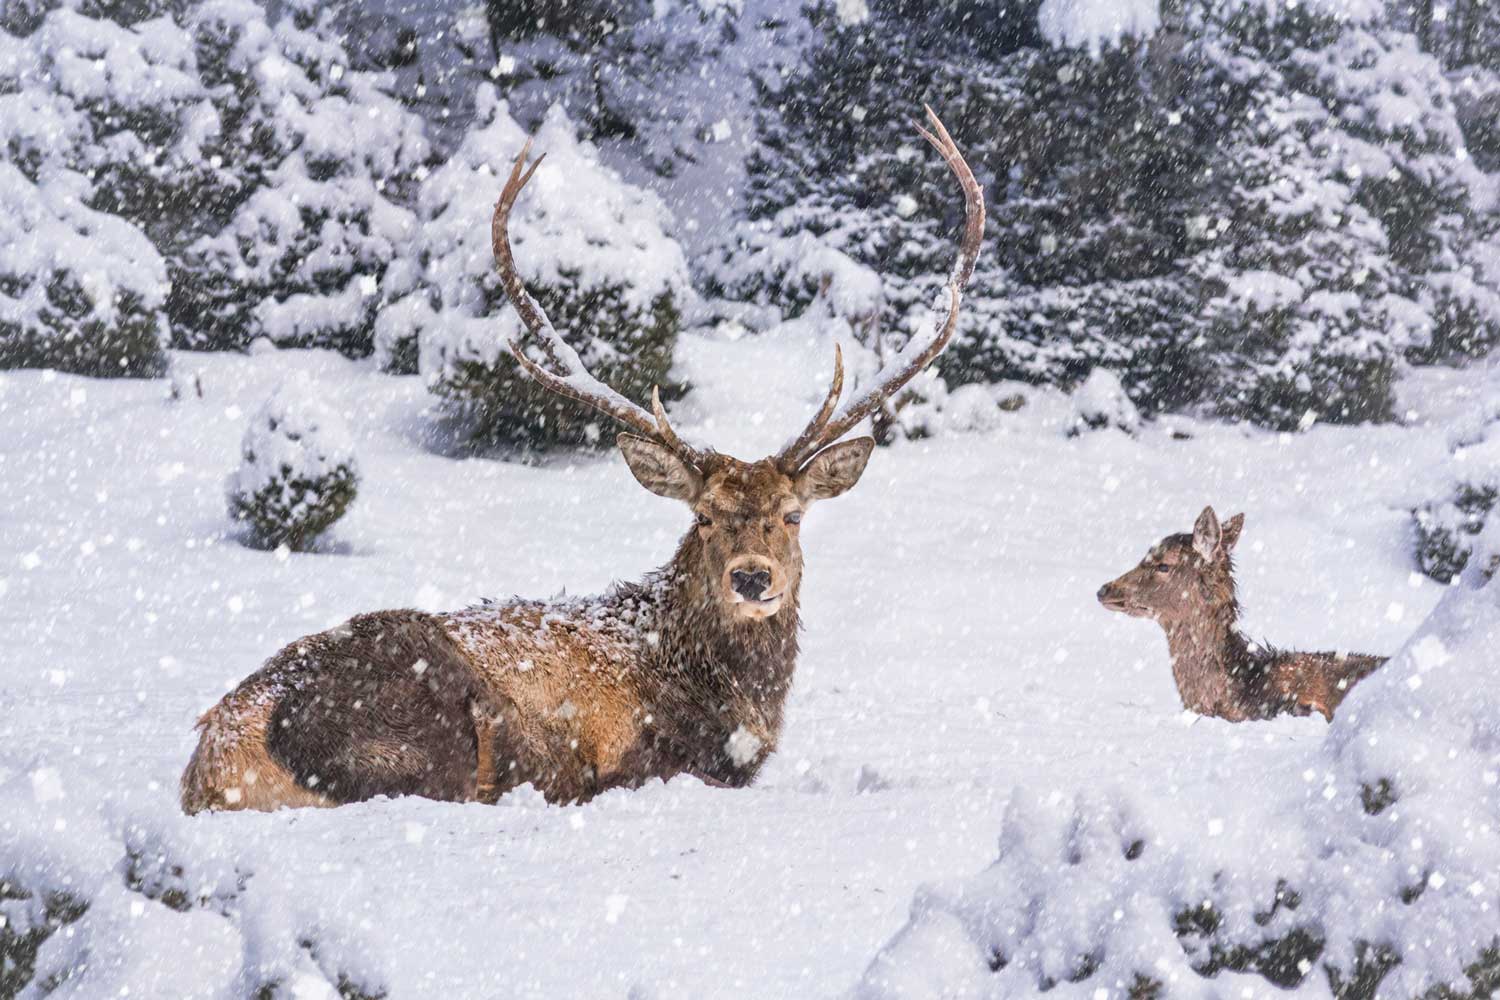 Each year, some 15,000 wild red deer are culled in Switzerland as part of efforts to control the deer population and protect the Swiss countryside